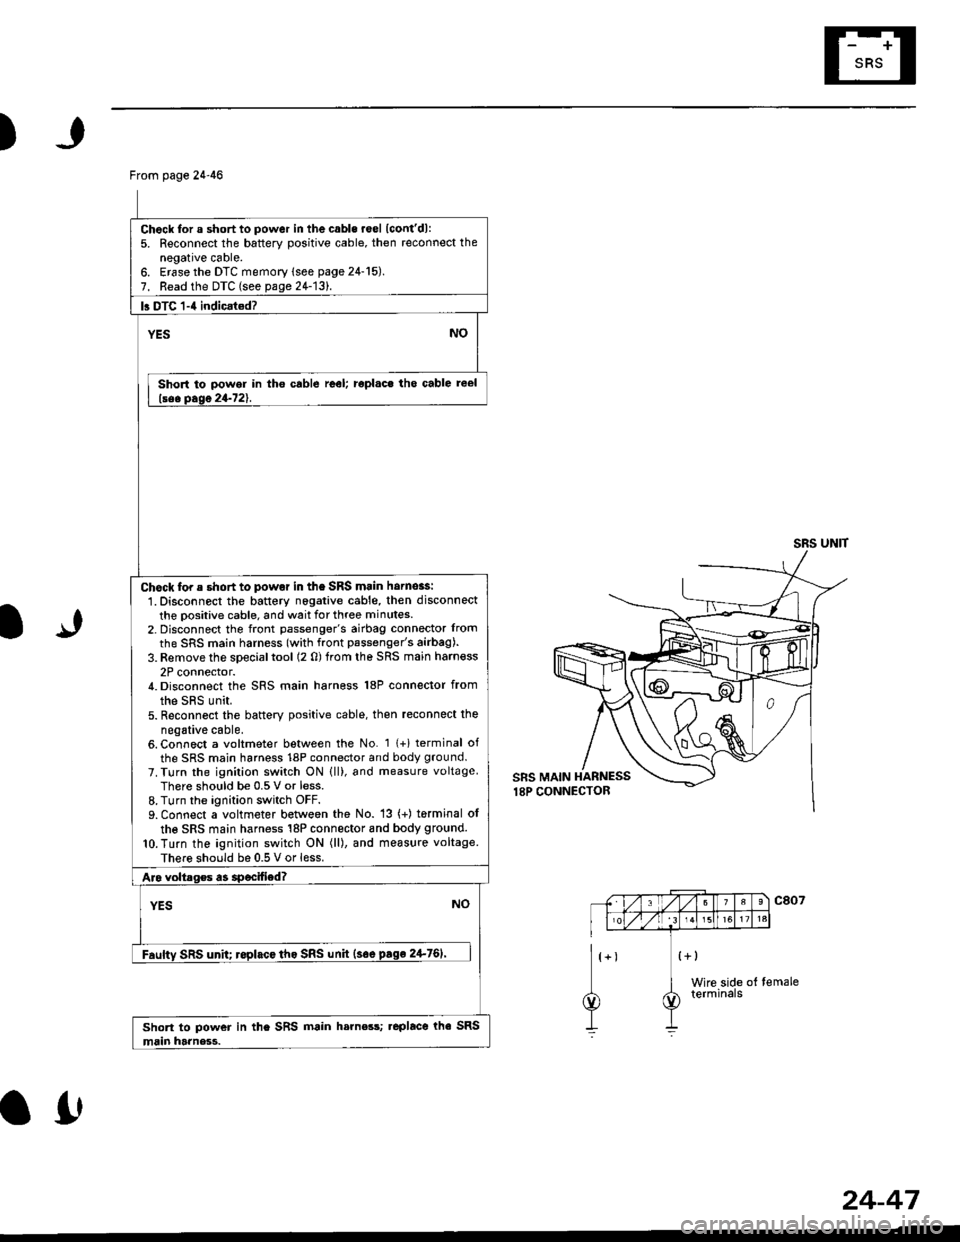 HONDA CIVIC 1996 6.G Workshop Manual )
From page 24-46
Chock for a short to power in the cabls roel lcontdl:5. Reconnect the battery positive cable, then reconnect thenegative cable.6. Erase the DTC memory lsee page 24-15).7. Read the D